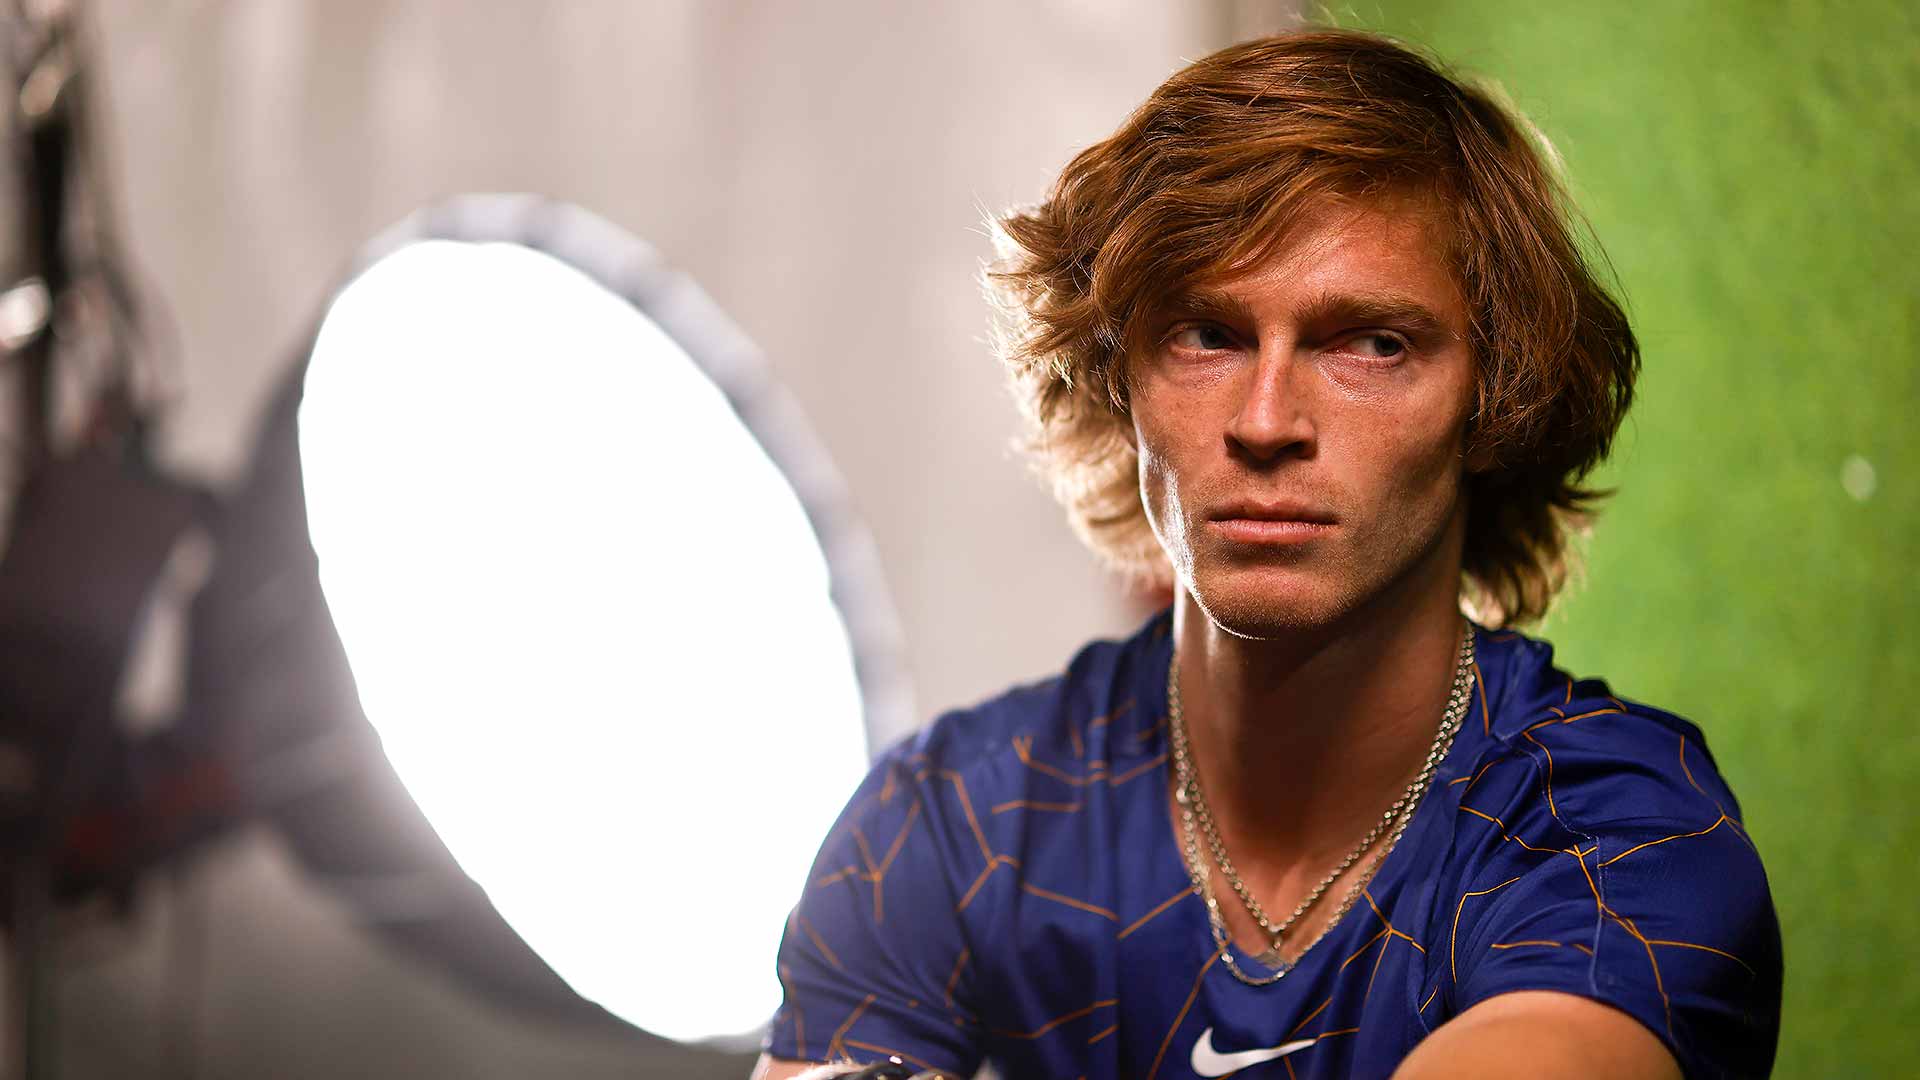 <a href='https://www.atptour.com/en/players/andrey-rublev/re44/overview'>Andrey Rublev</a> at the 2022 ATP/WTA Super Shoot in Indian Wells.